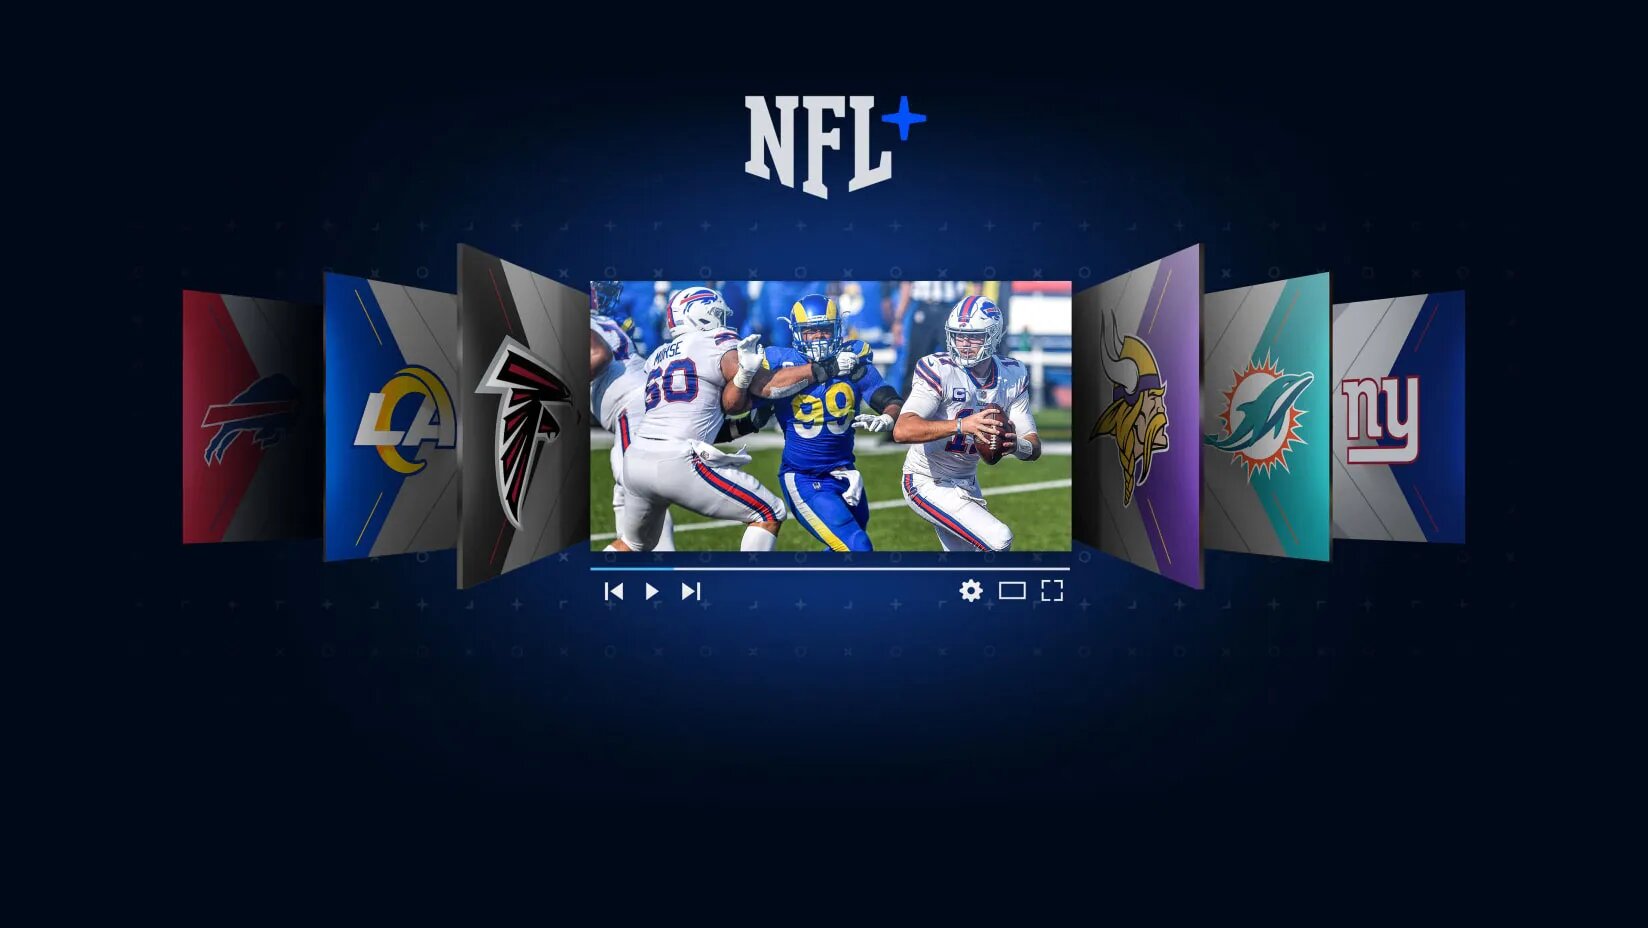 How To Watch - NFL Network